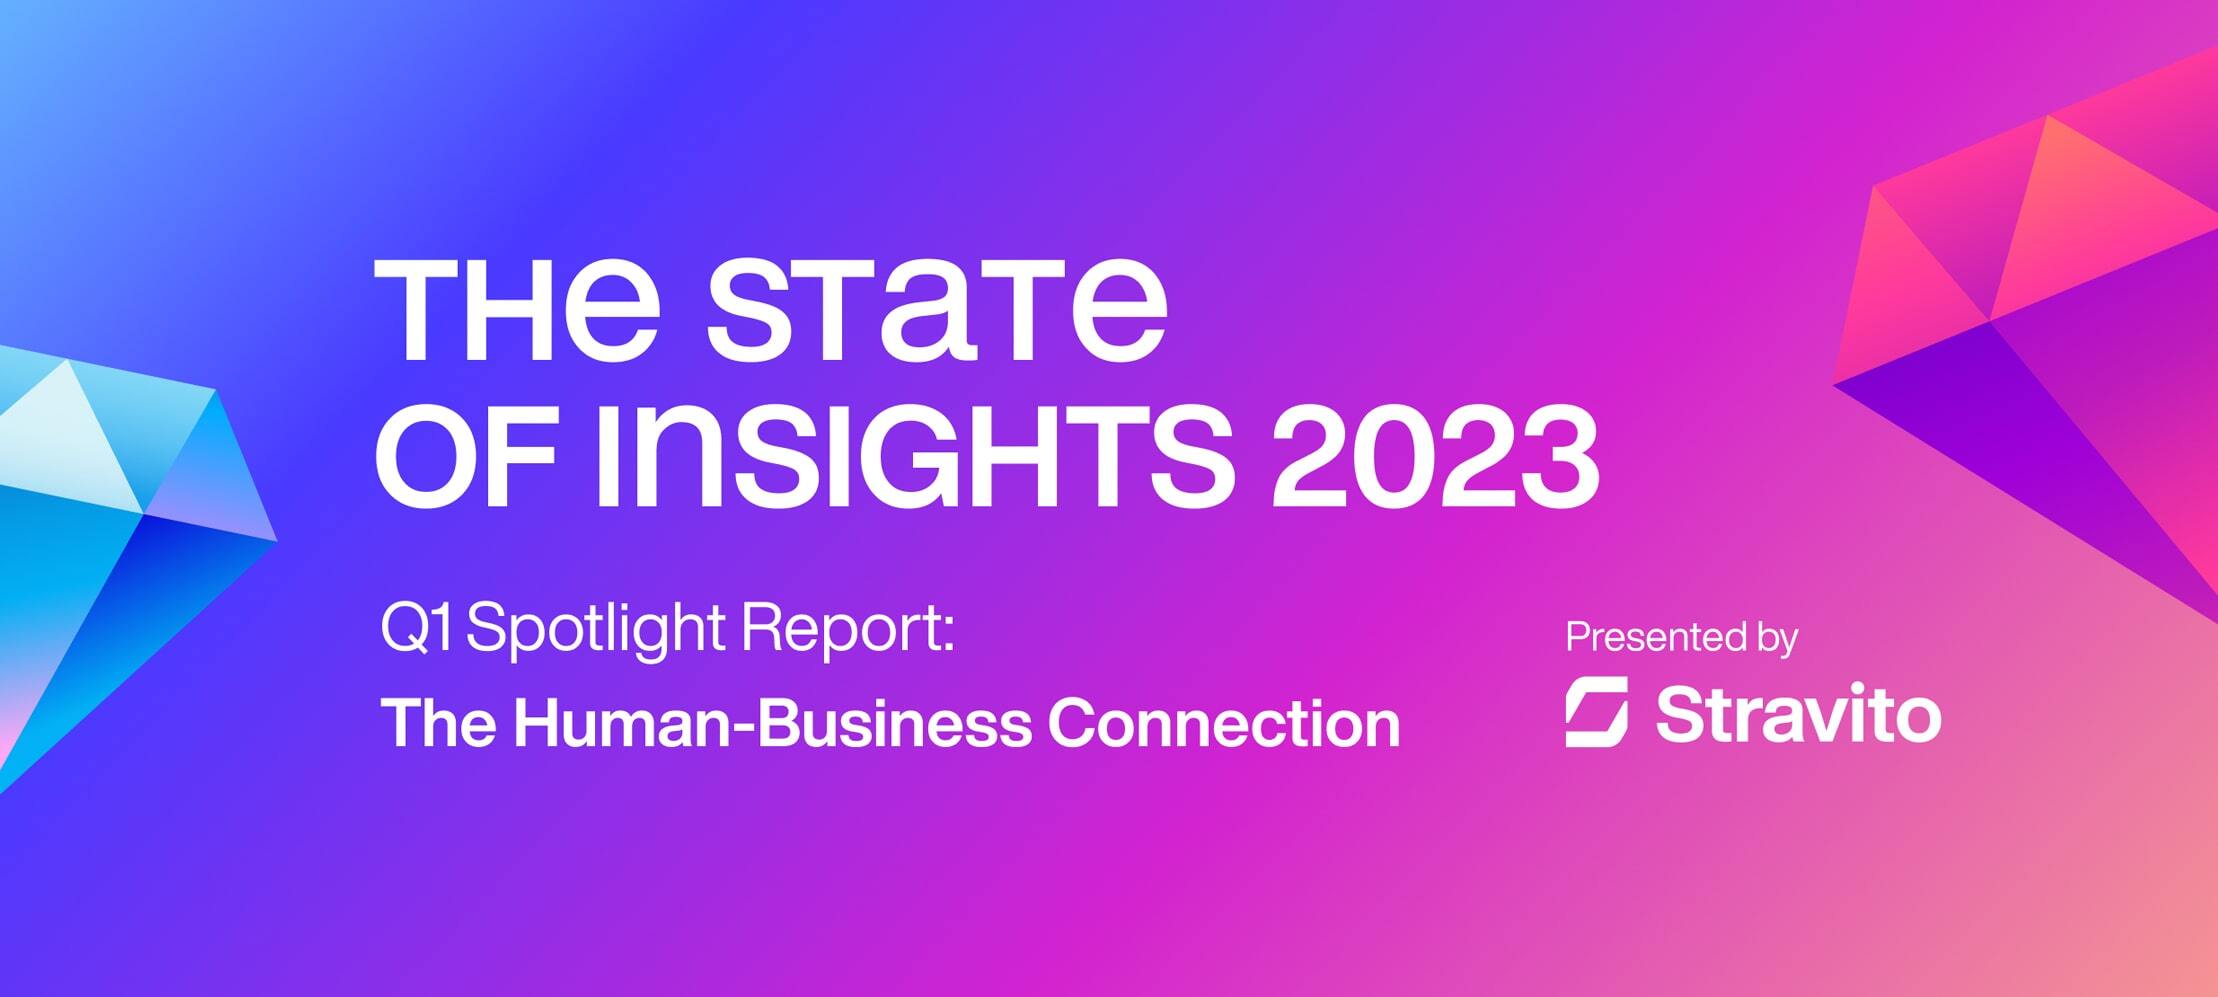 The State of Insights 2023 presented by Stravito